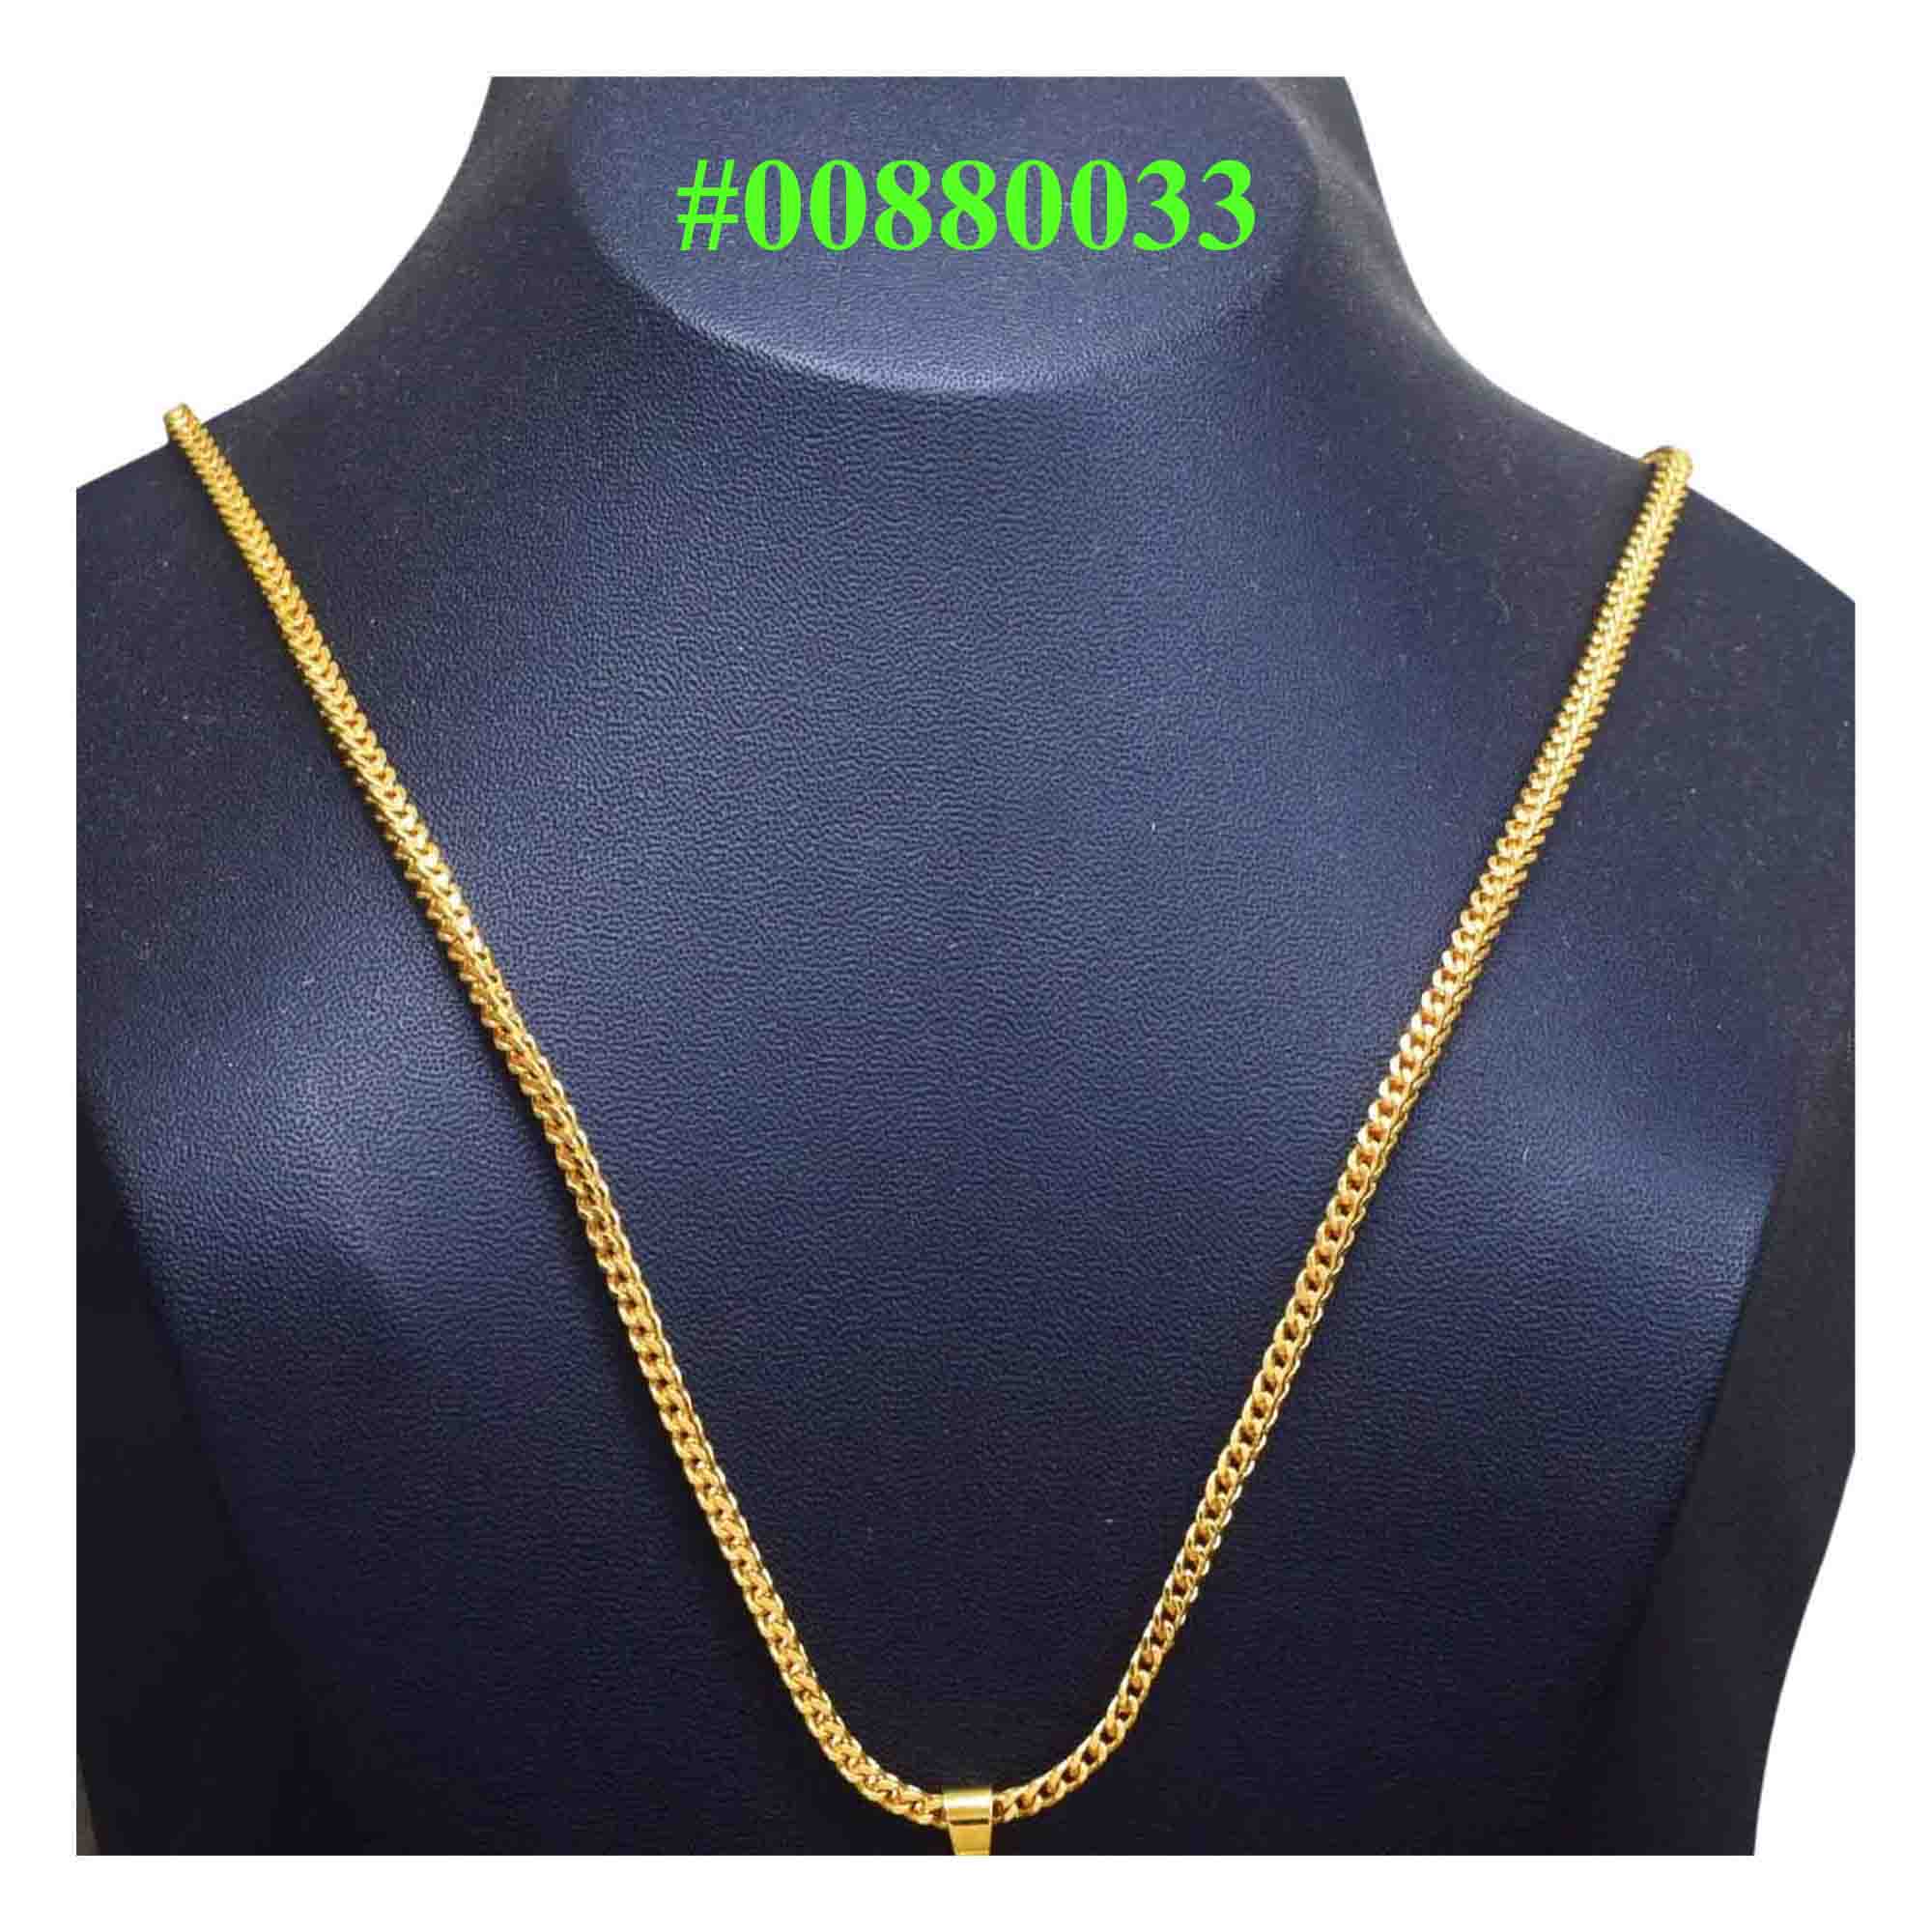 Gold Plated 18/24 Inch 3mm Link chain w/o Pendant Necklaces NowBuy.lk 2